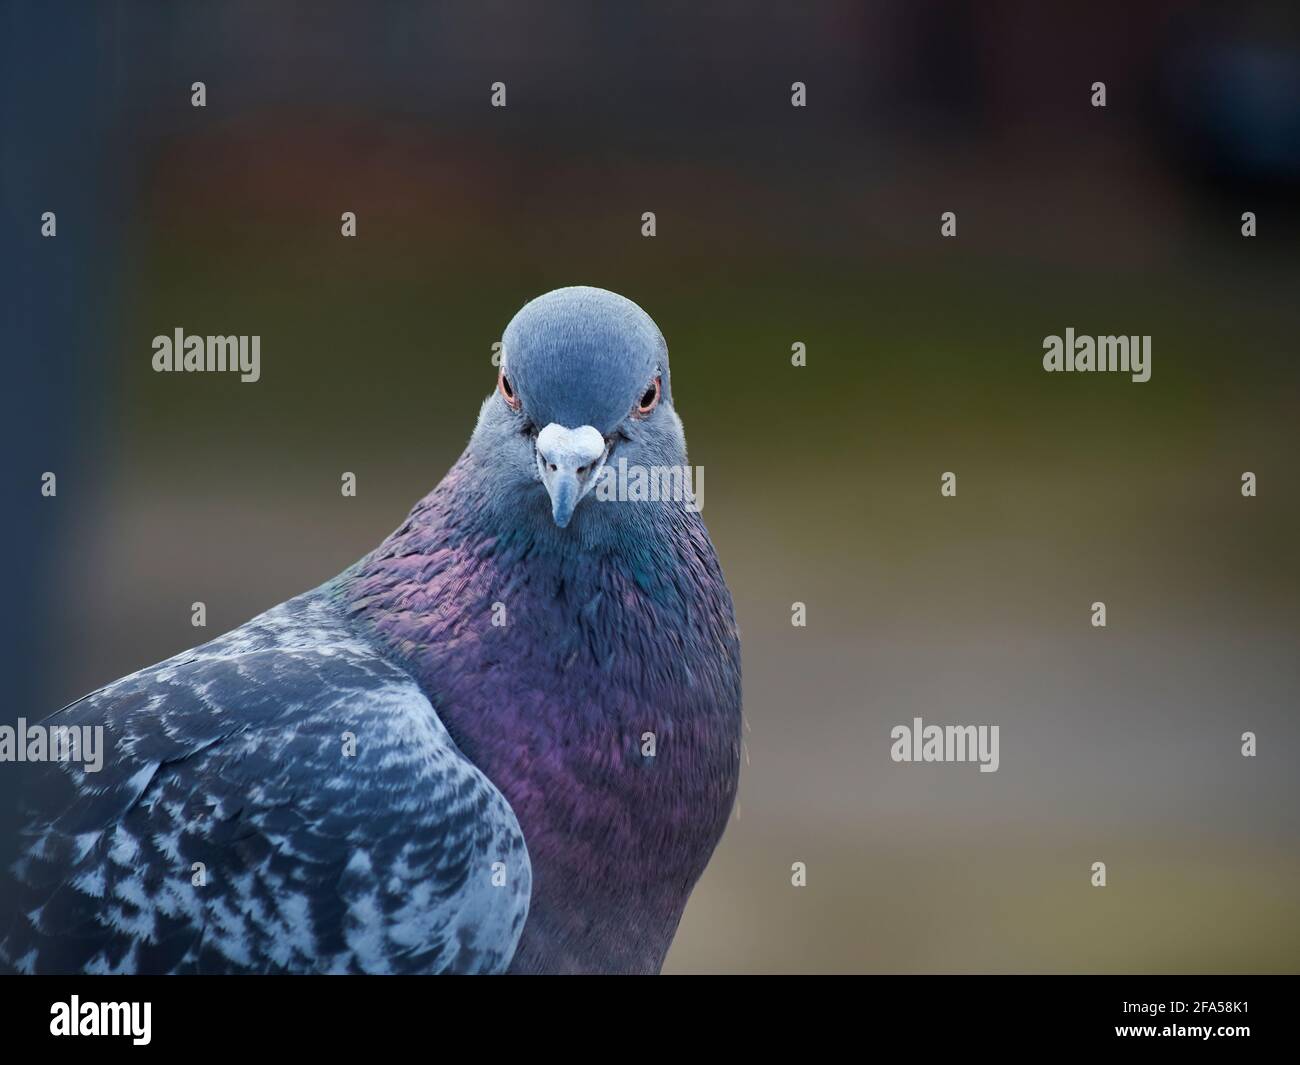 A feral pigeon, somewhat more handsome and prepossessing than is usual, looks to camera in front of a heavily defocused background. Stock Photo